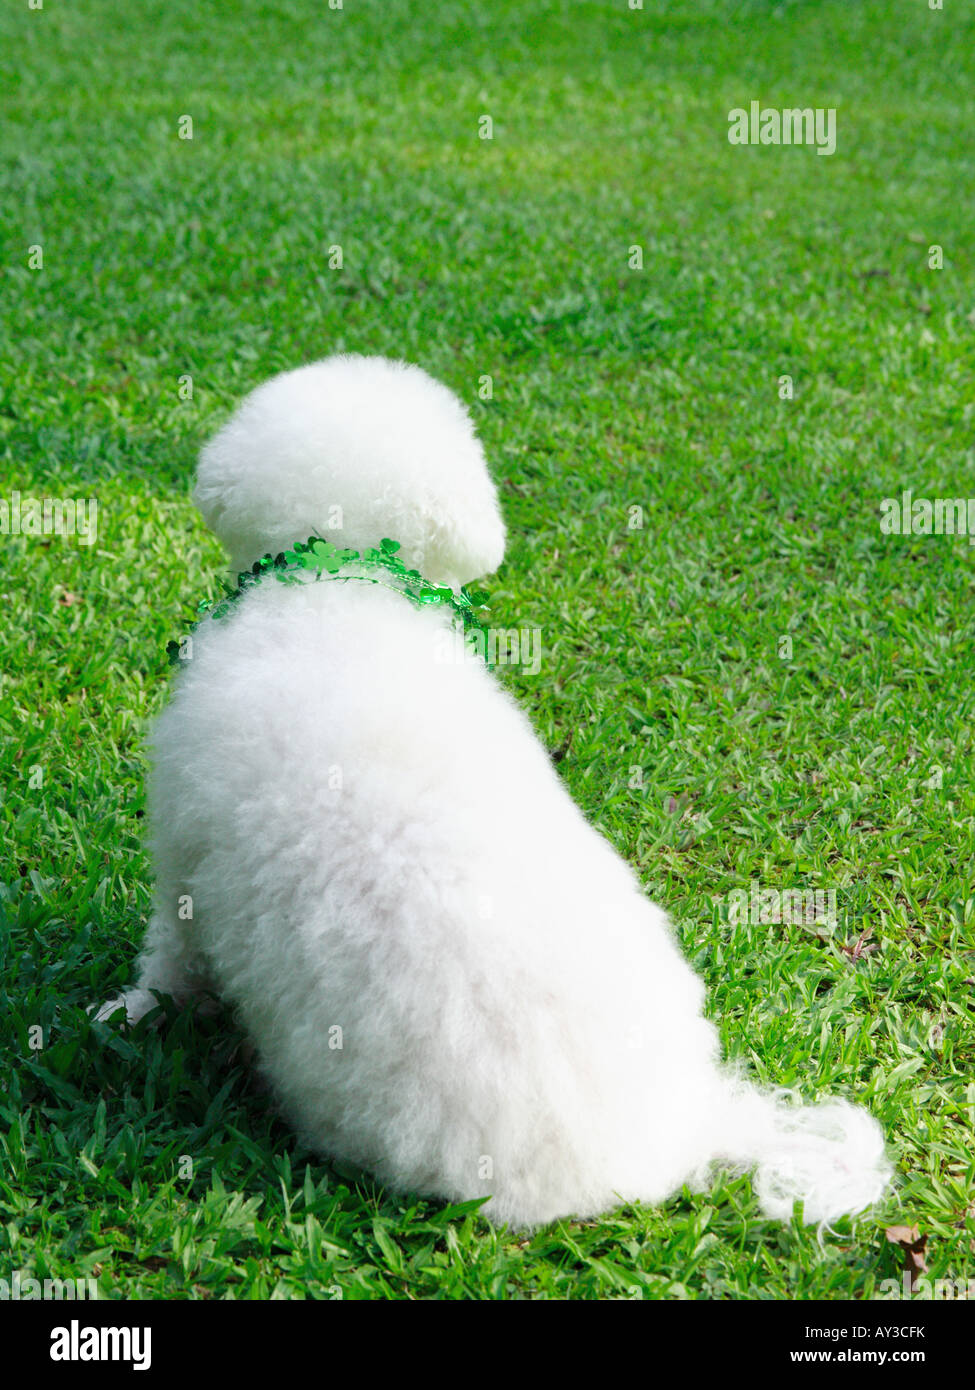 Bichon Frise sitting on grass in a lawn Stock Photo